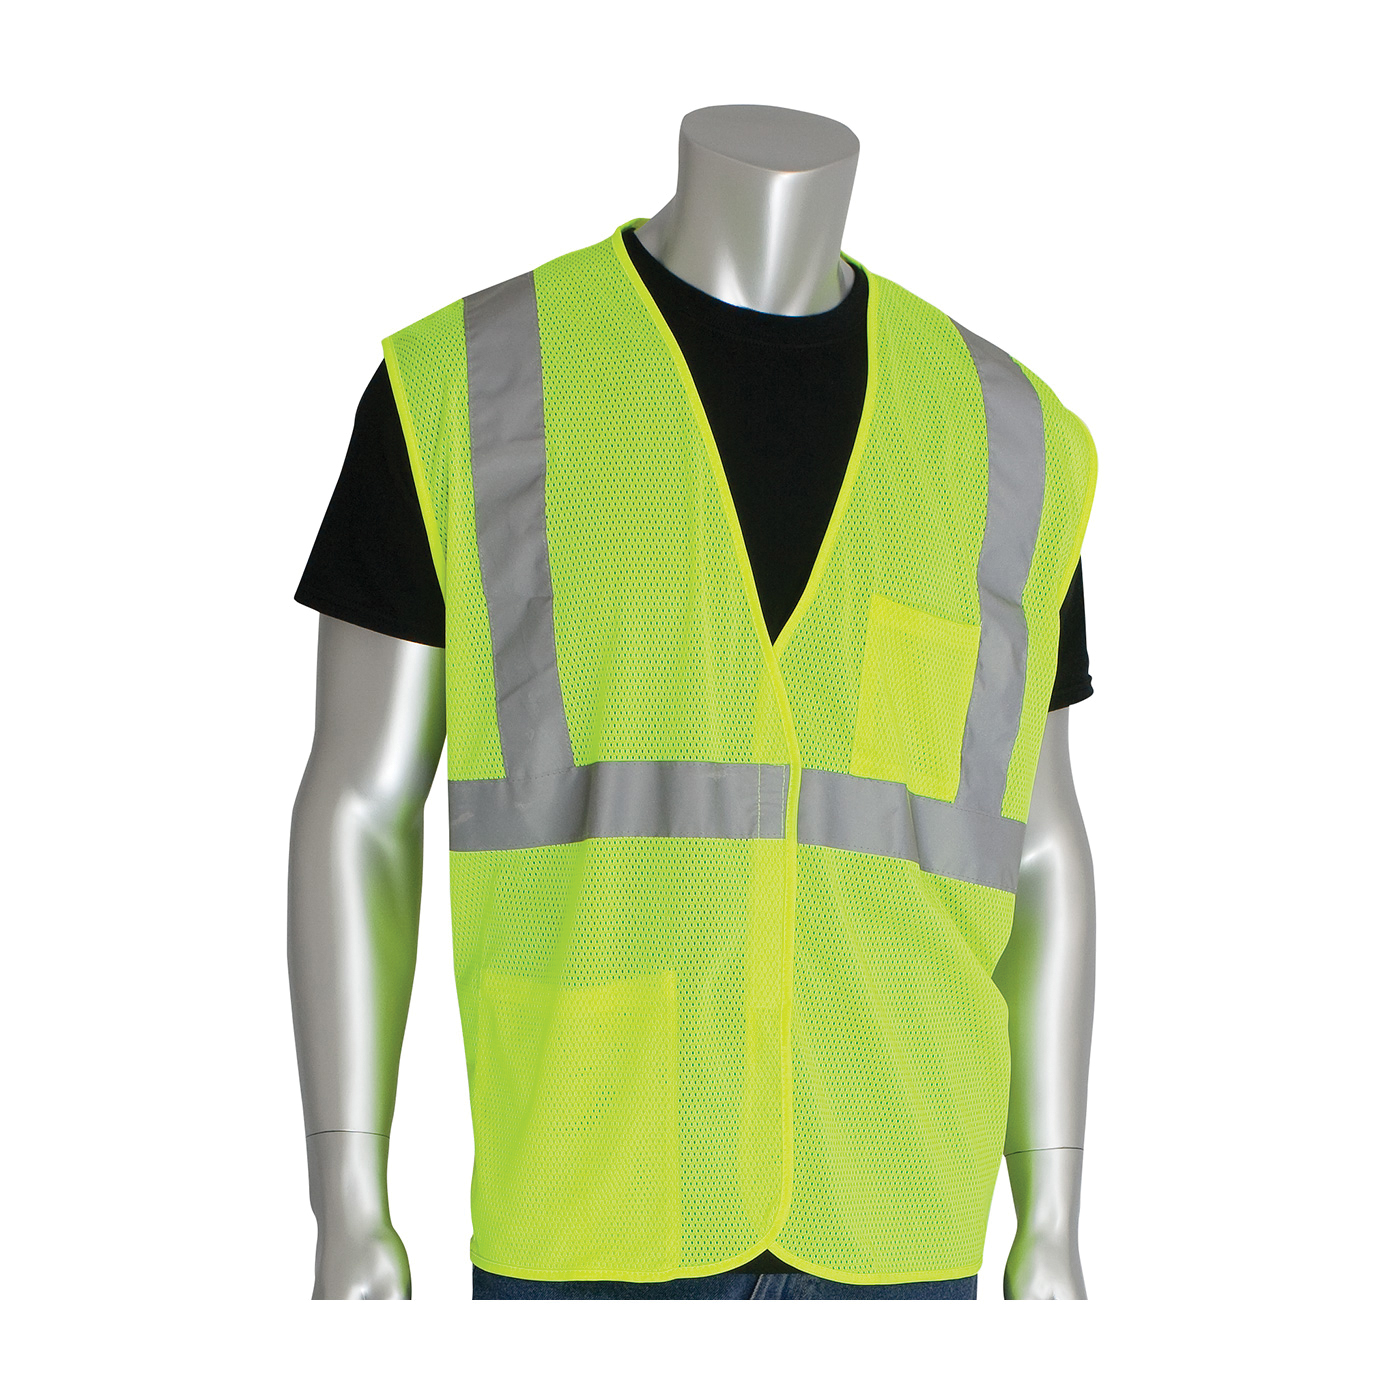 PIP® 302-0702-LY/L Safety Vest, L, Hi-Viz Lime Yellow, Polyester Mesh, Hook and Loop Closure, 2 Pockets, ANSI Class: Class 2, Specifications Met: ANSI 107 Type R